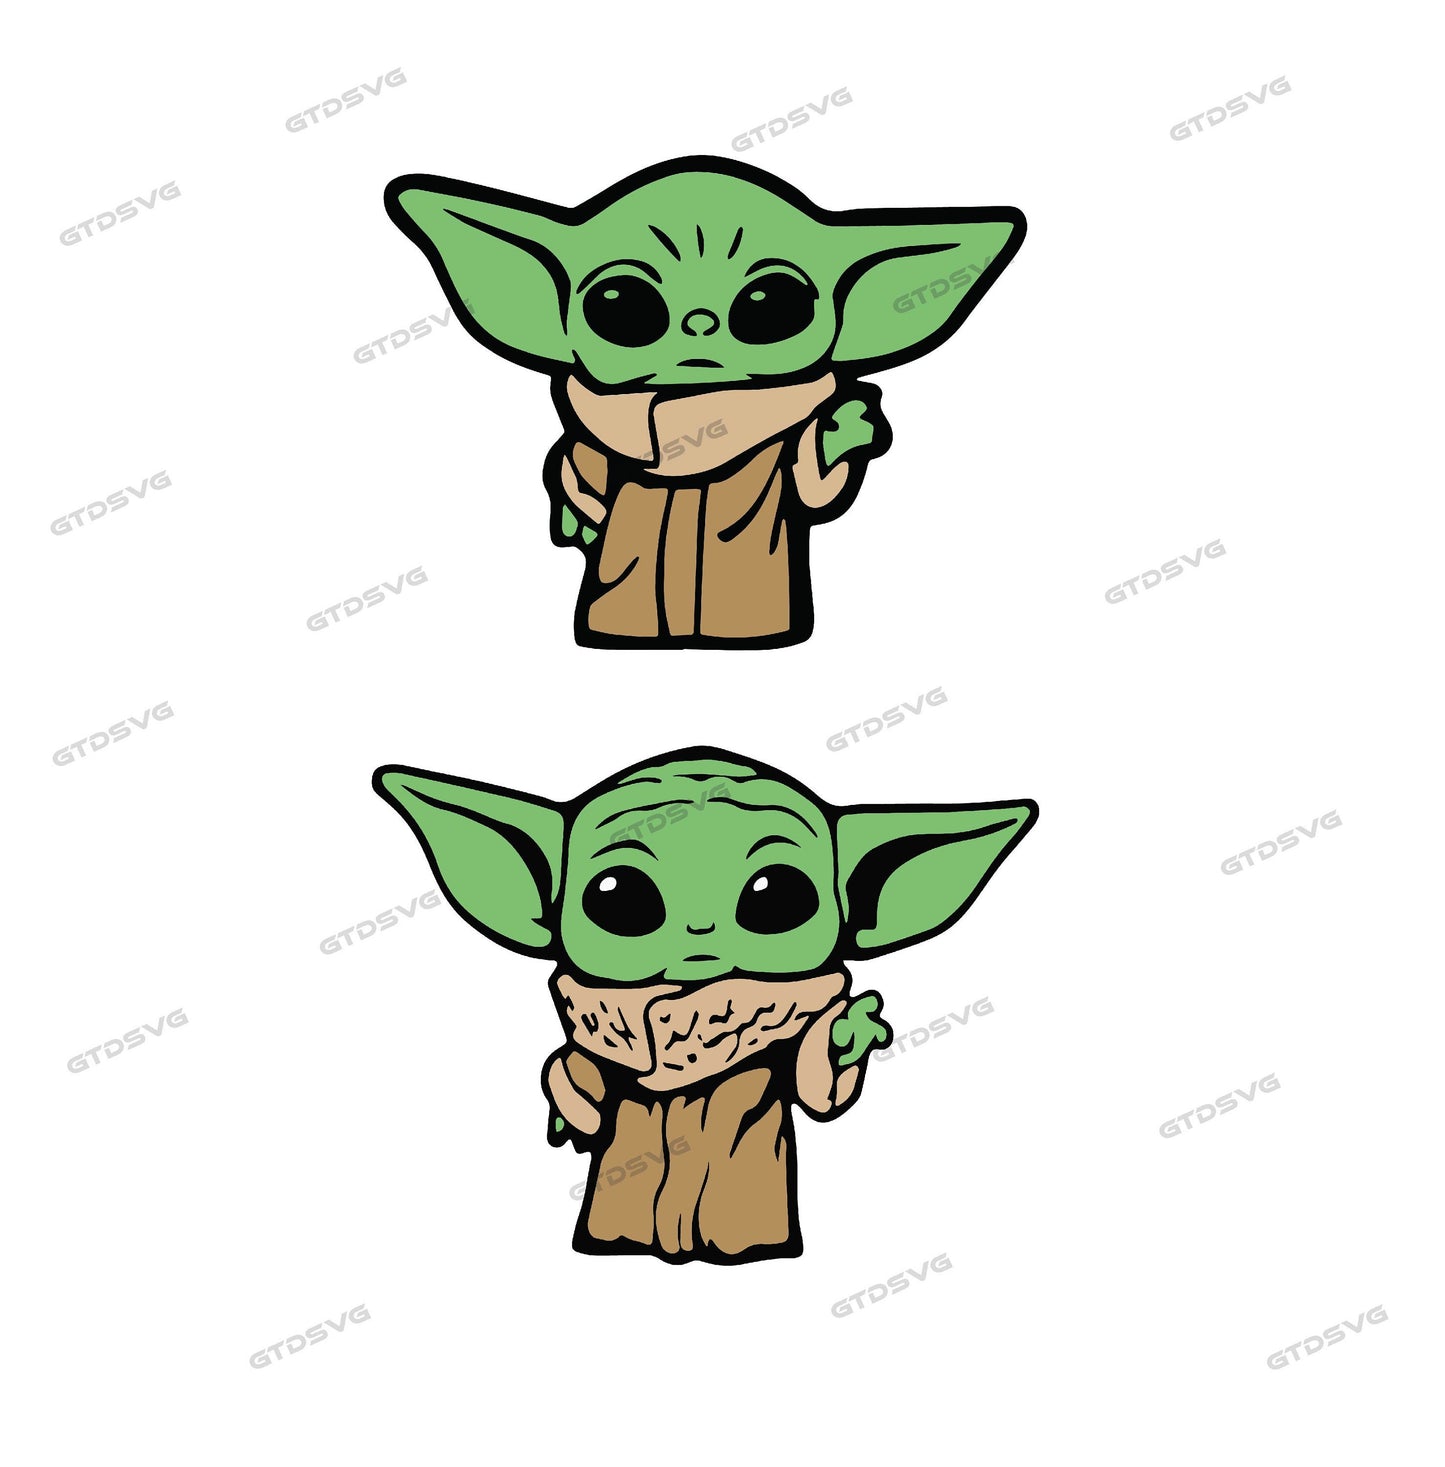 Baby Yoda SVG, Grogu, Star Wars Svg, Svg, Dxf, Png, Eps, Jpg,  Cricut file, Cut file, Printable file, silhouette, Vector, Clipart, 2 FILES